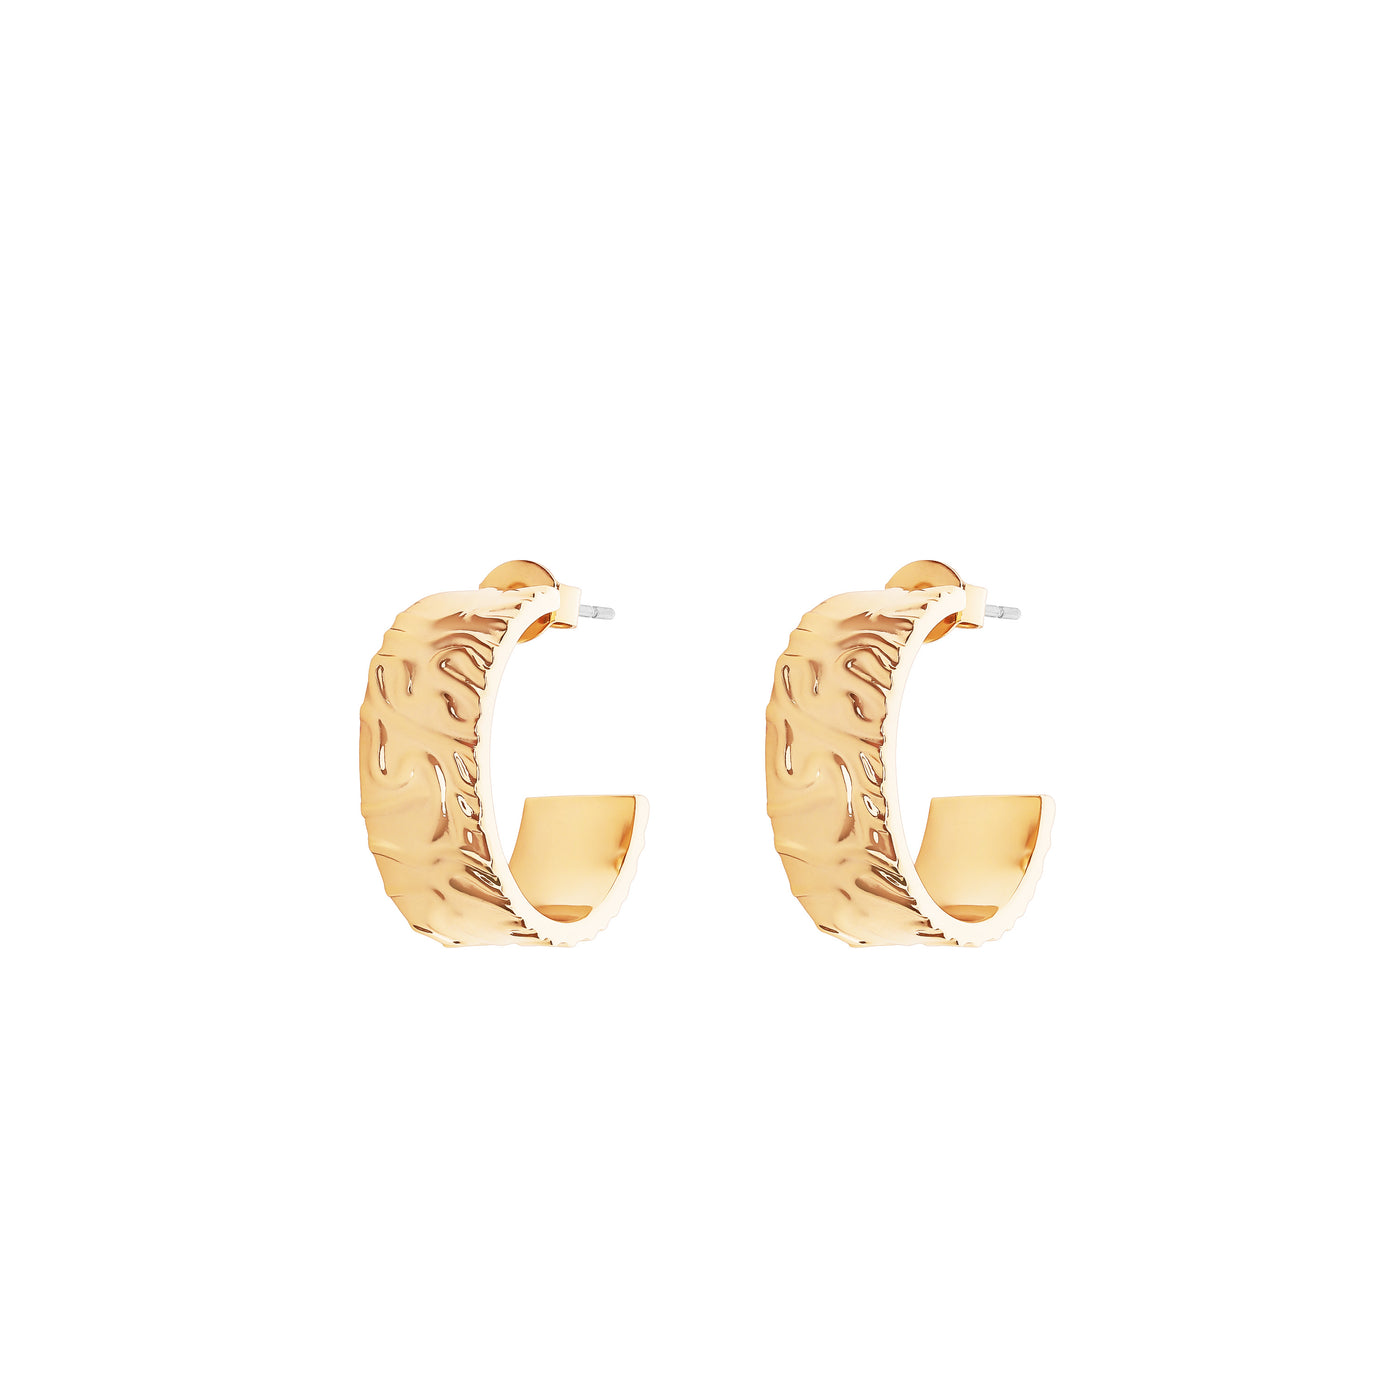 Tipperary Crystal Earrings - Hoop Collection - Hammered Gold